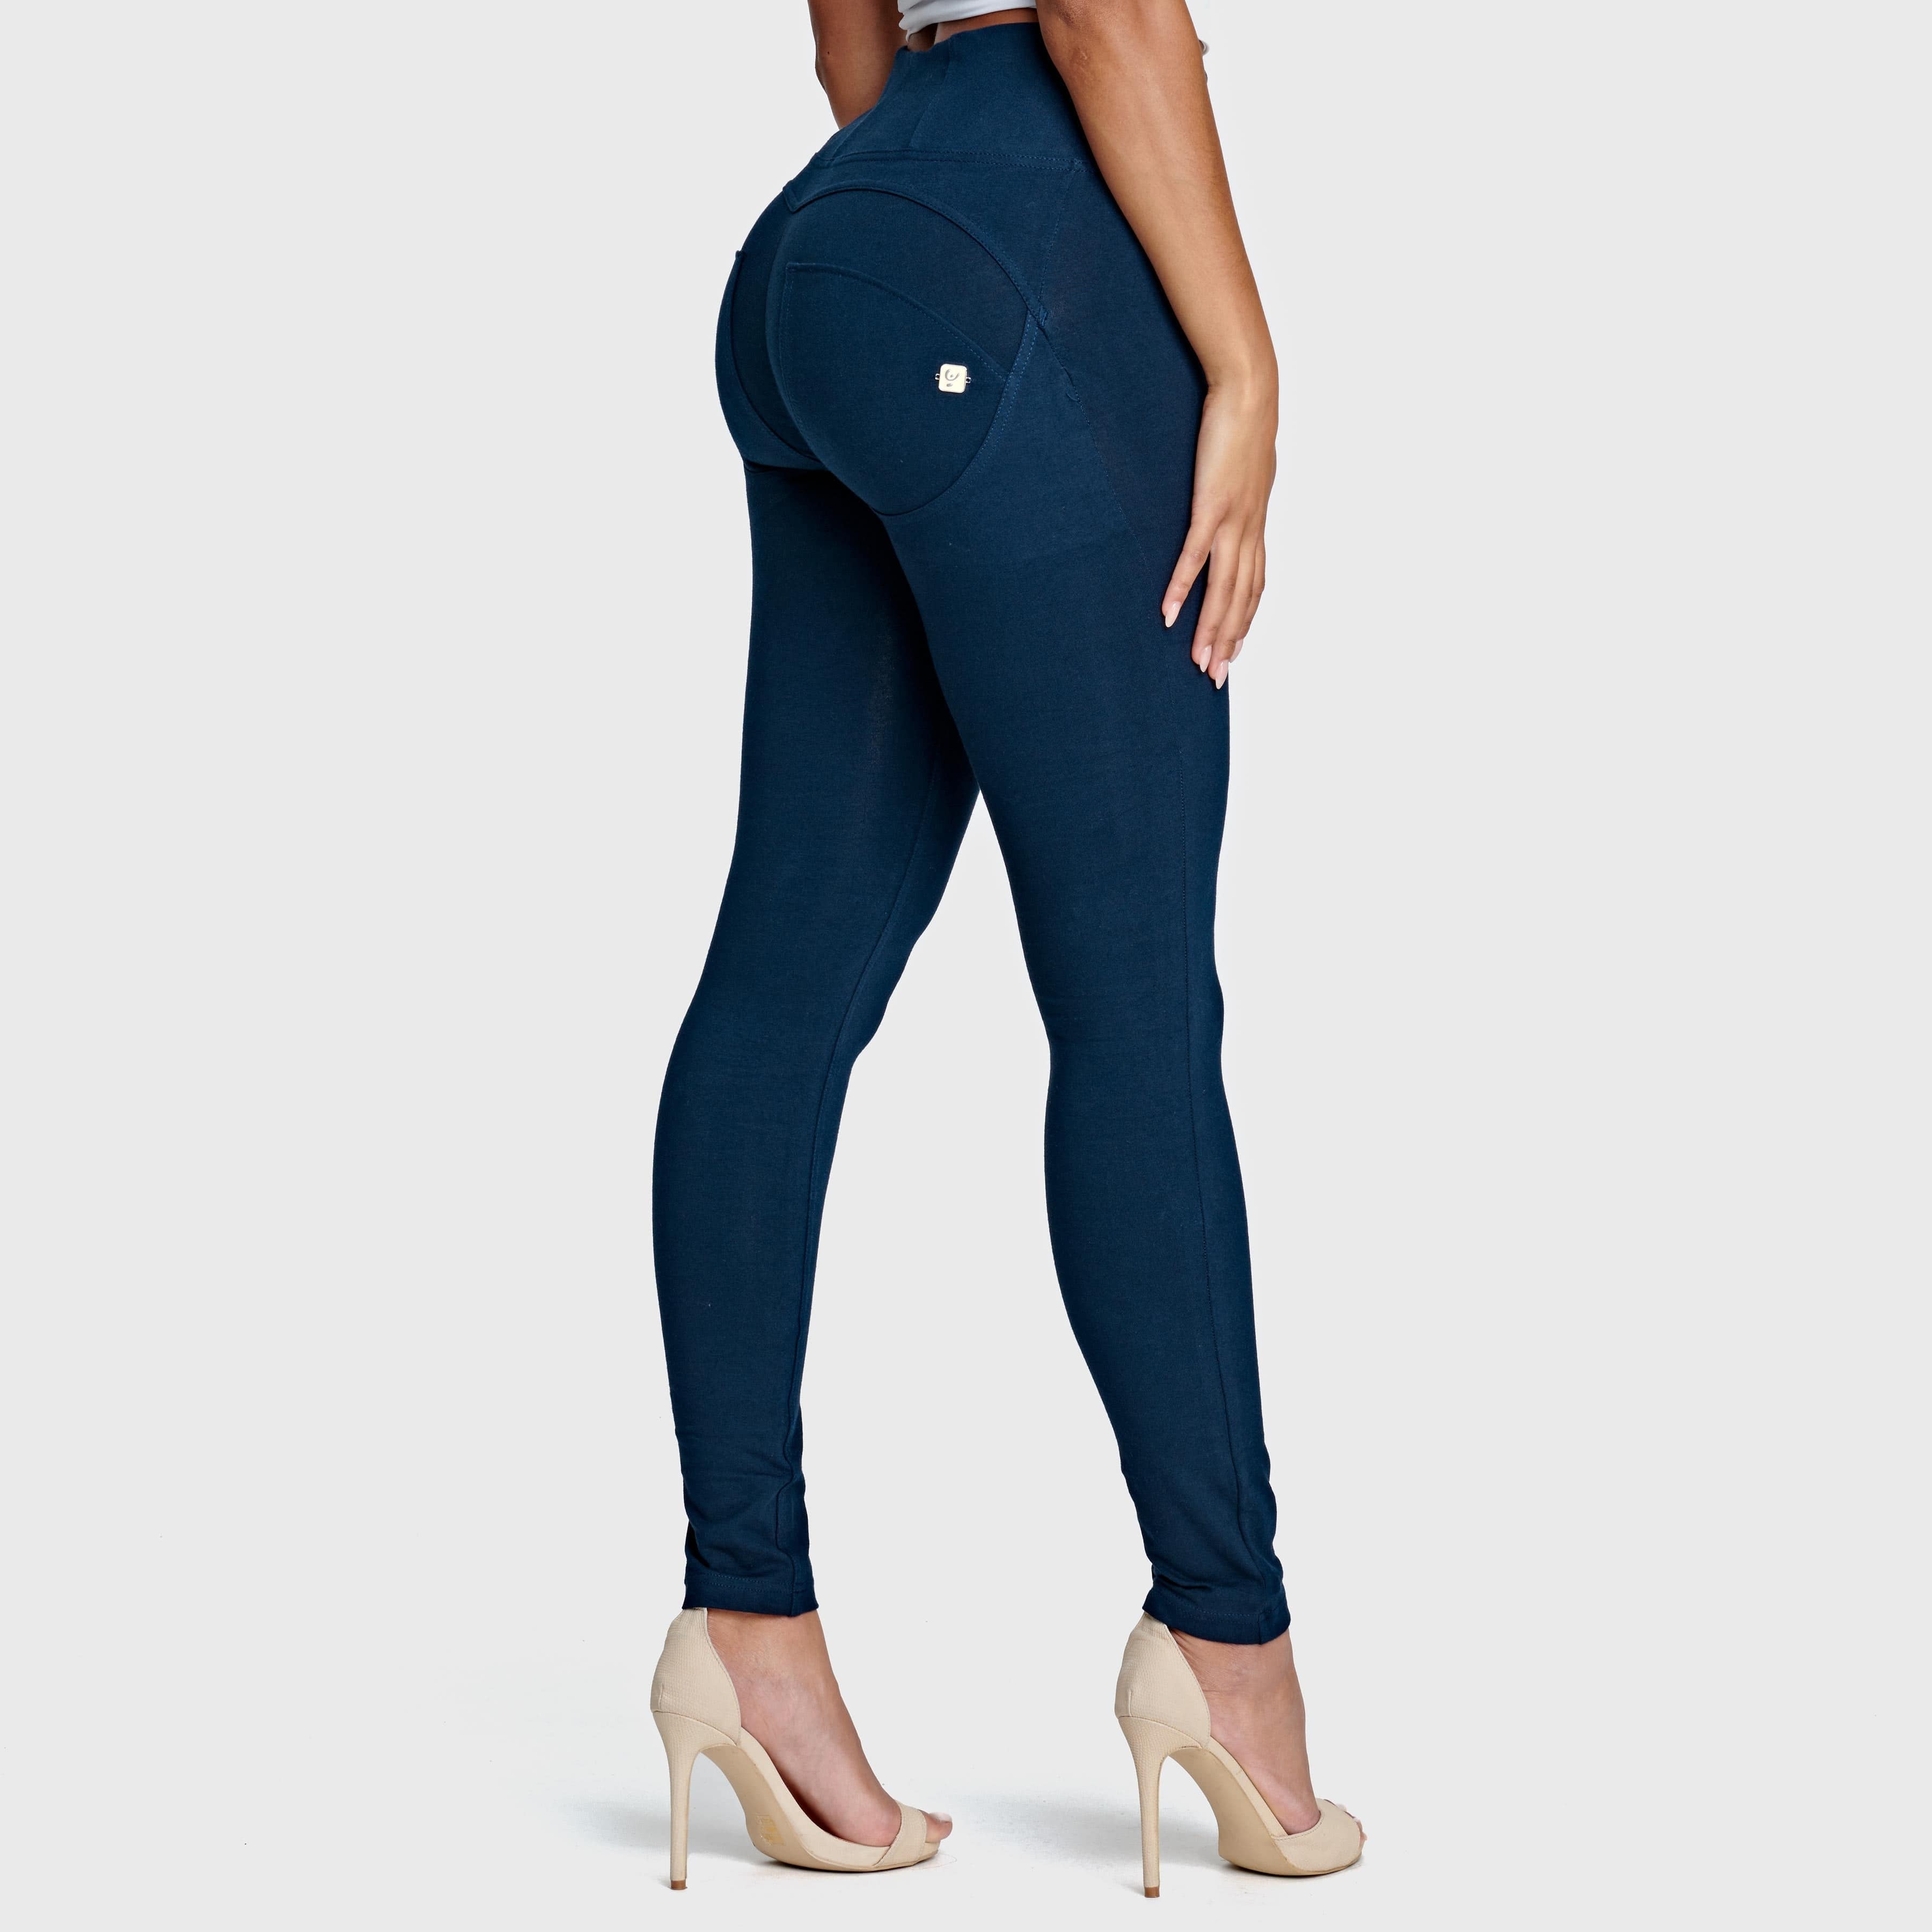 WR.UP® Fashion - High Waisted - Full Length - Navy Blue 1